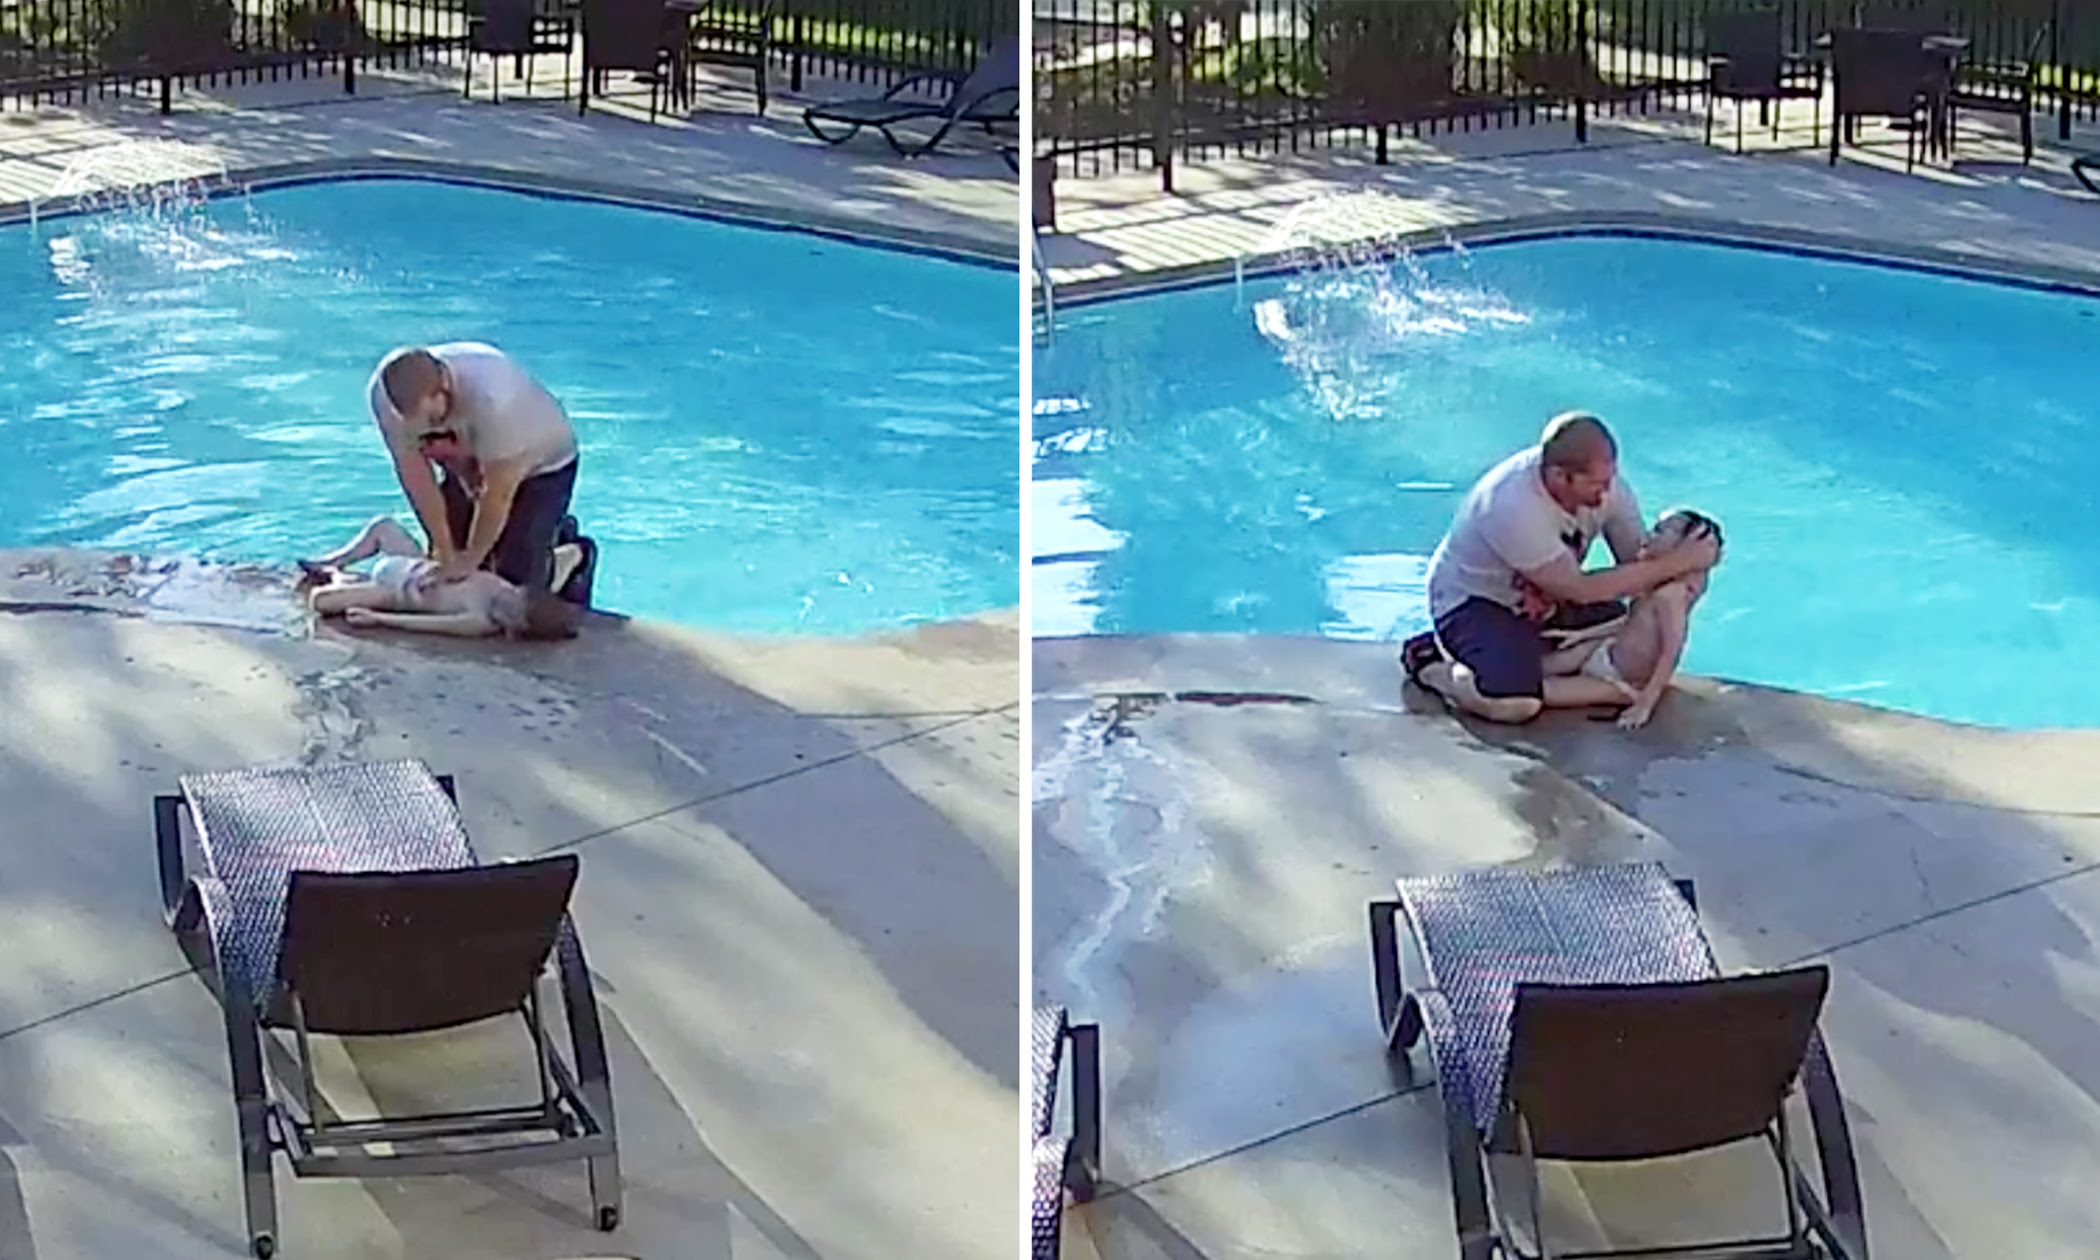 VIDEO: 12-Year-Old and Dad See Commotion Near Swimming Pool, Rush to Save Autistic Toddler Drowning